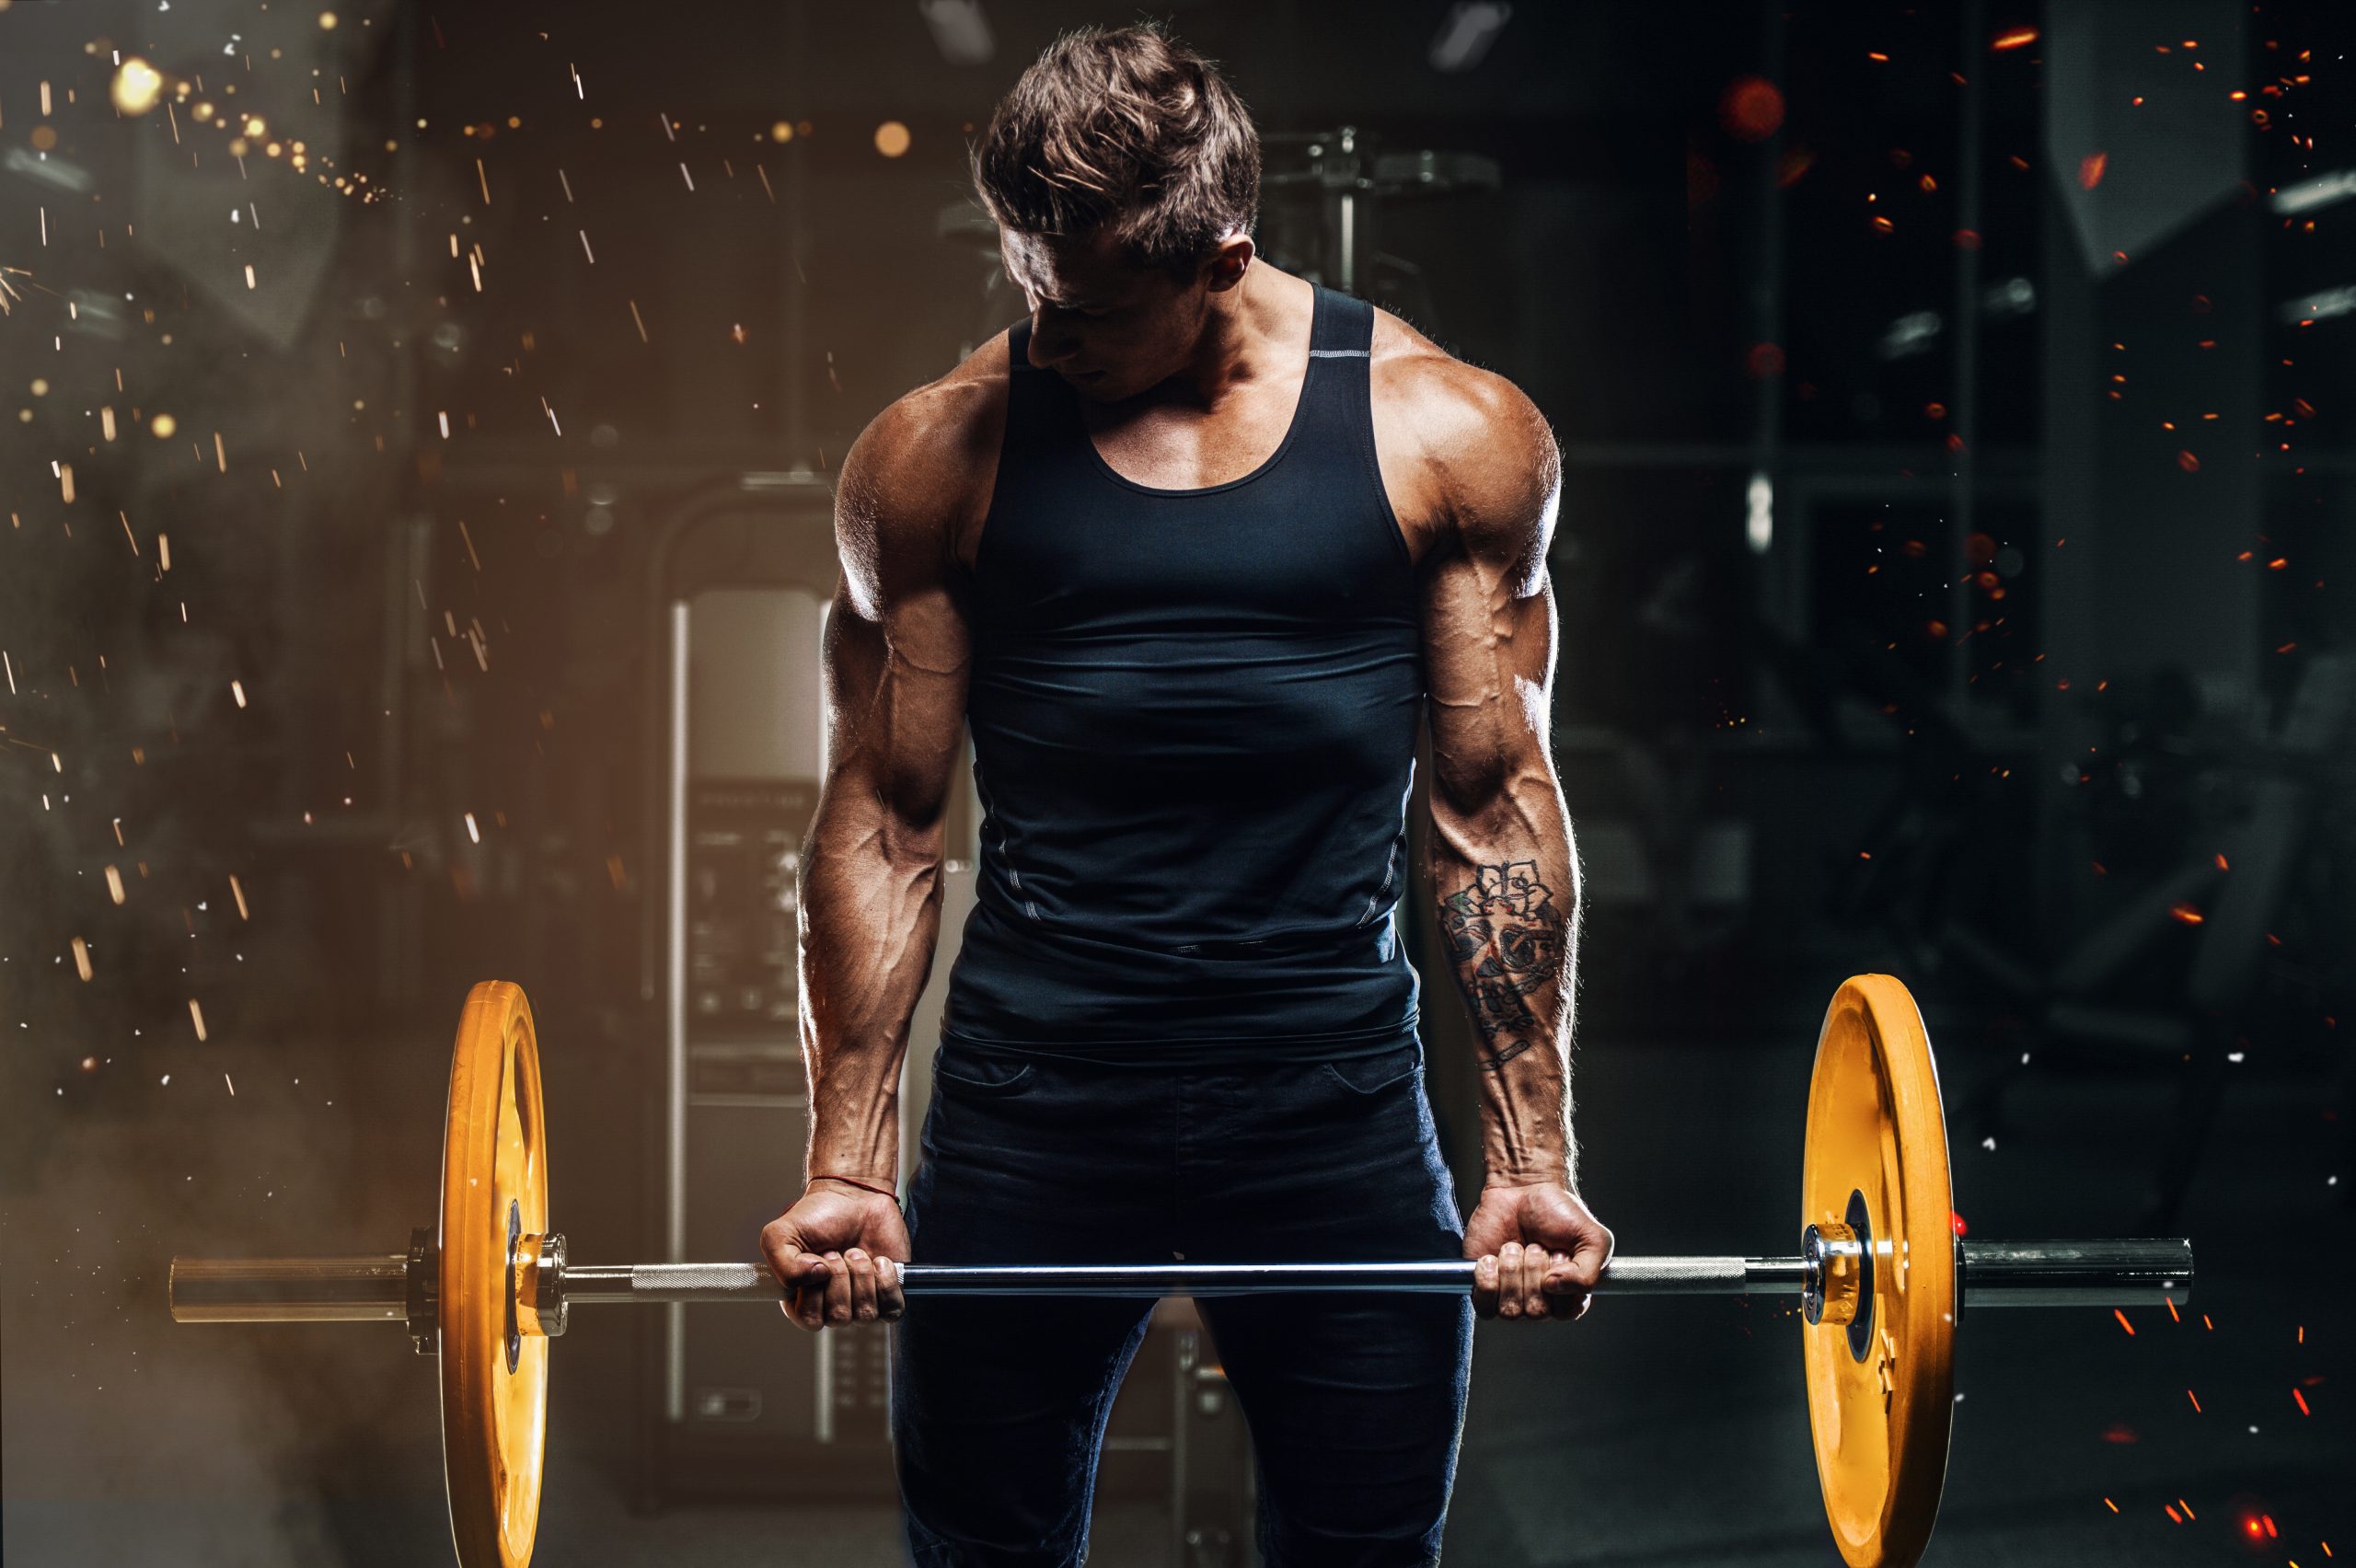 JMax Fitness - BEST ARM EXERCISES by @jmaxfitness - If you want to get big  arms, then you need to focus on getting stronger in compound exercises  (most of your effort should